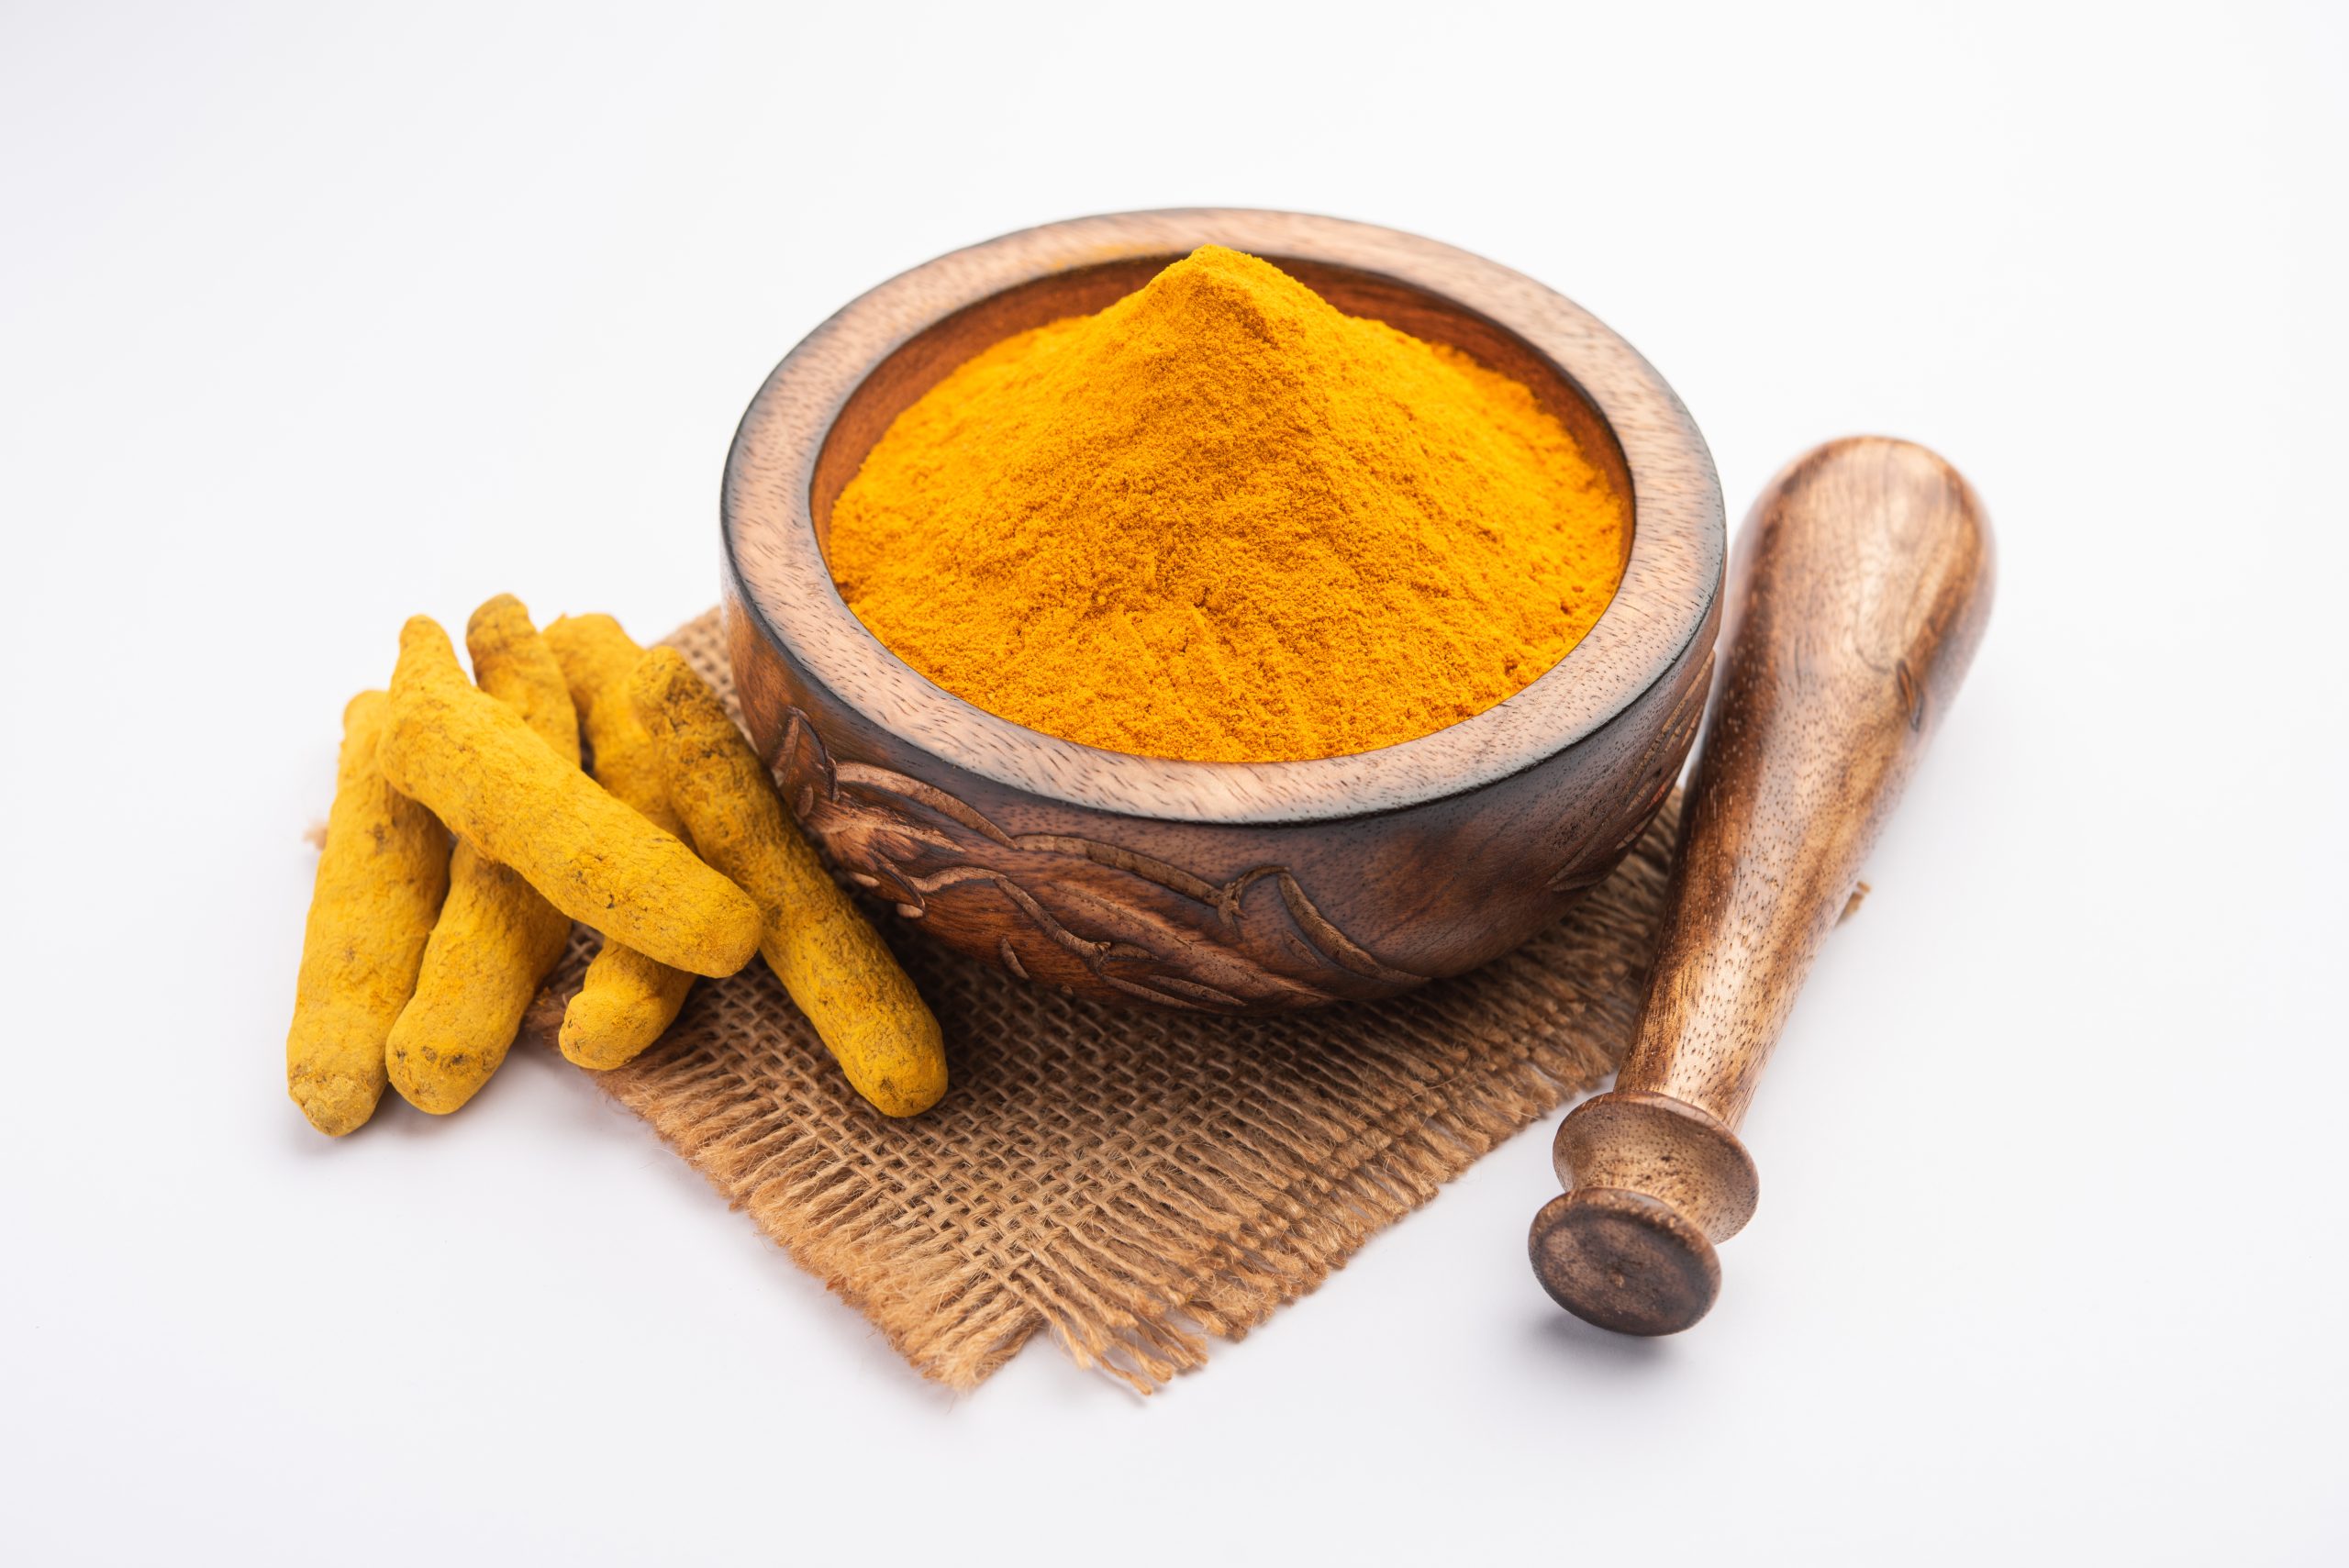 What does Turmeric do to help lower Cholesterol?